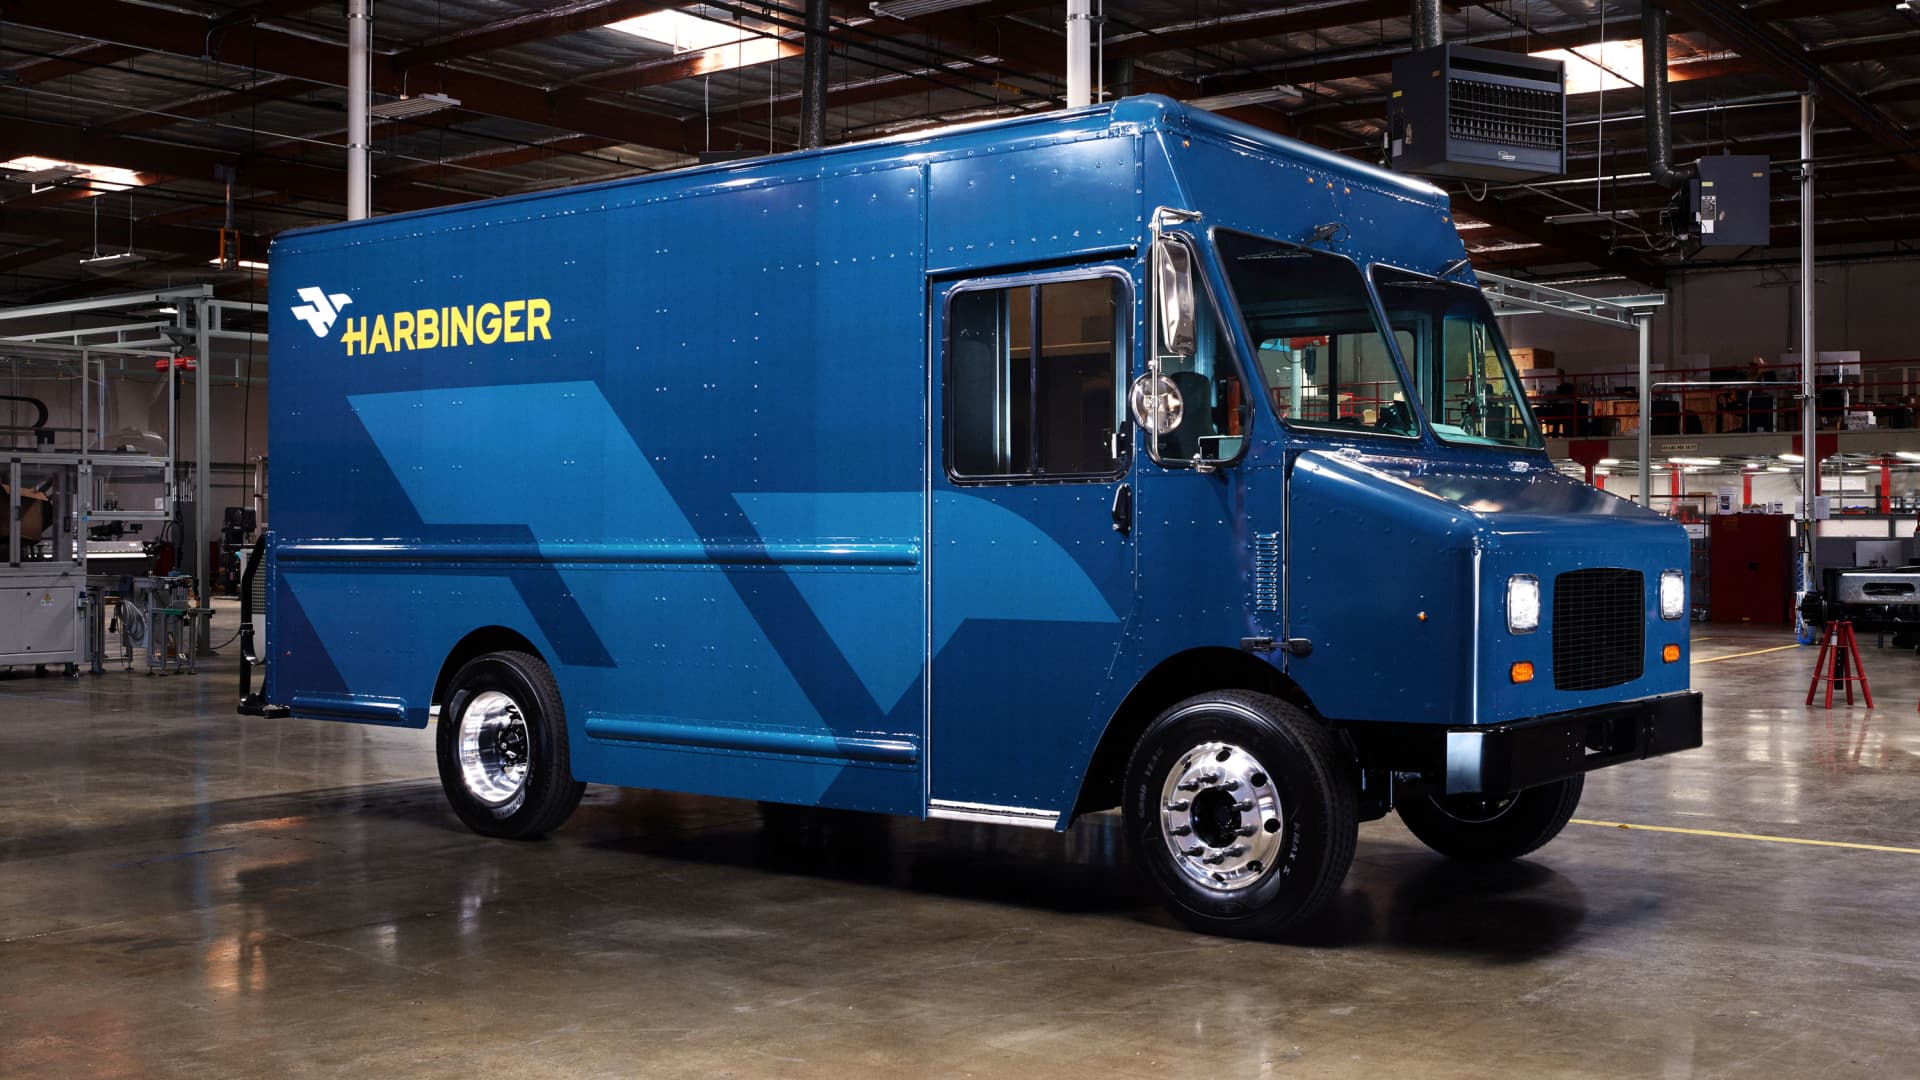 EV startup Harbinger, founded by Canoo and QuantumScape veterans, aims to shake up medium-duty truck market